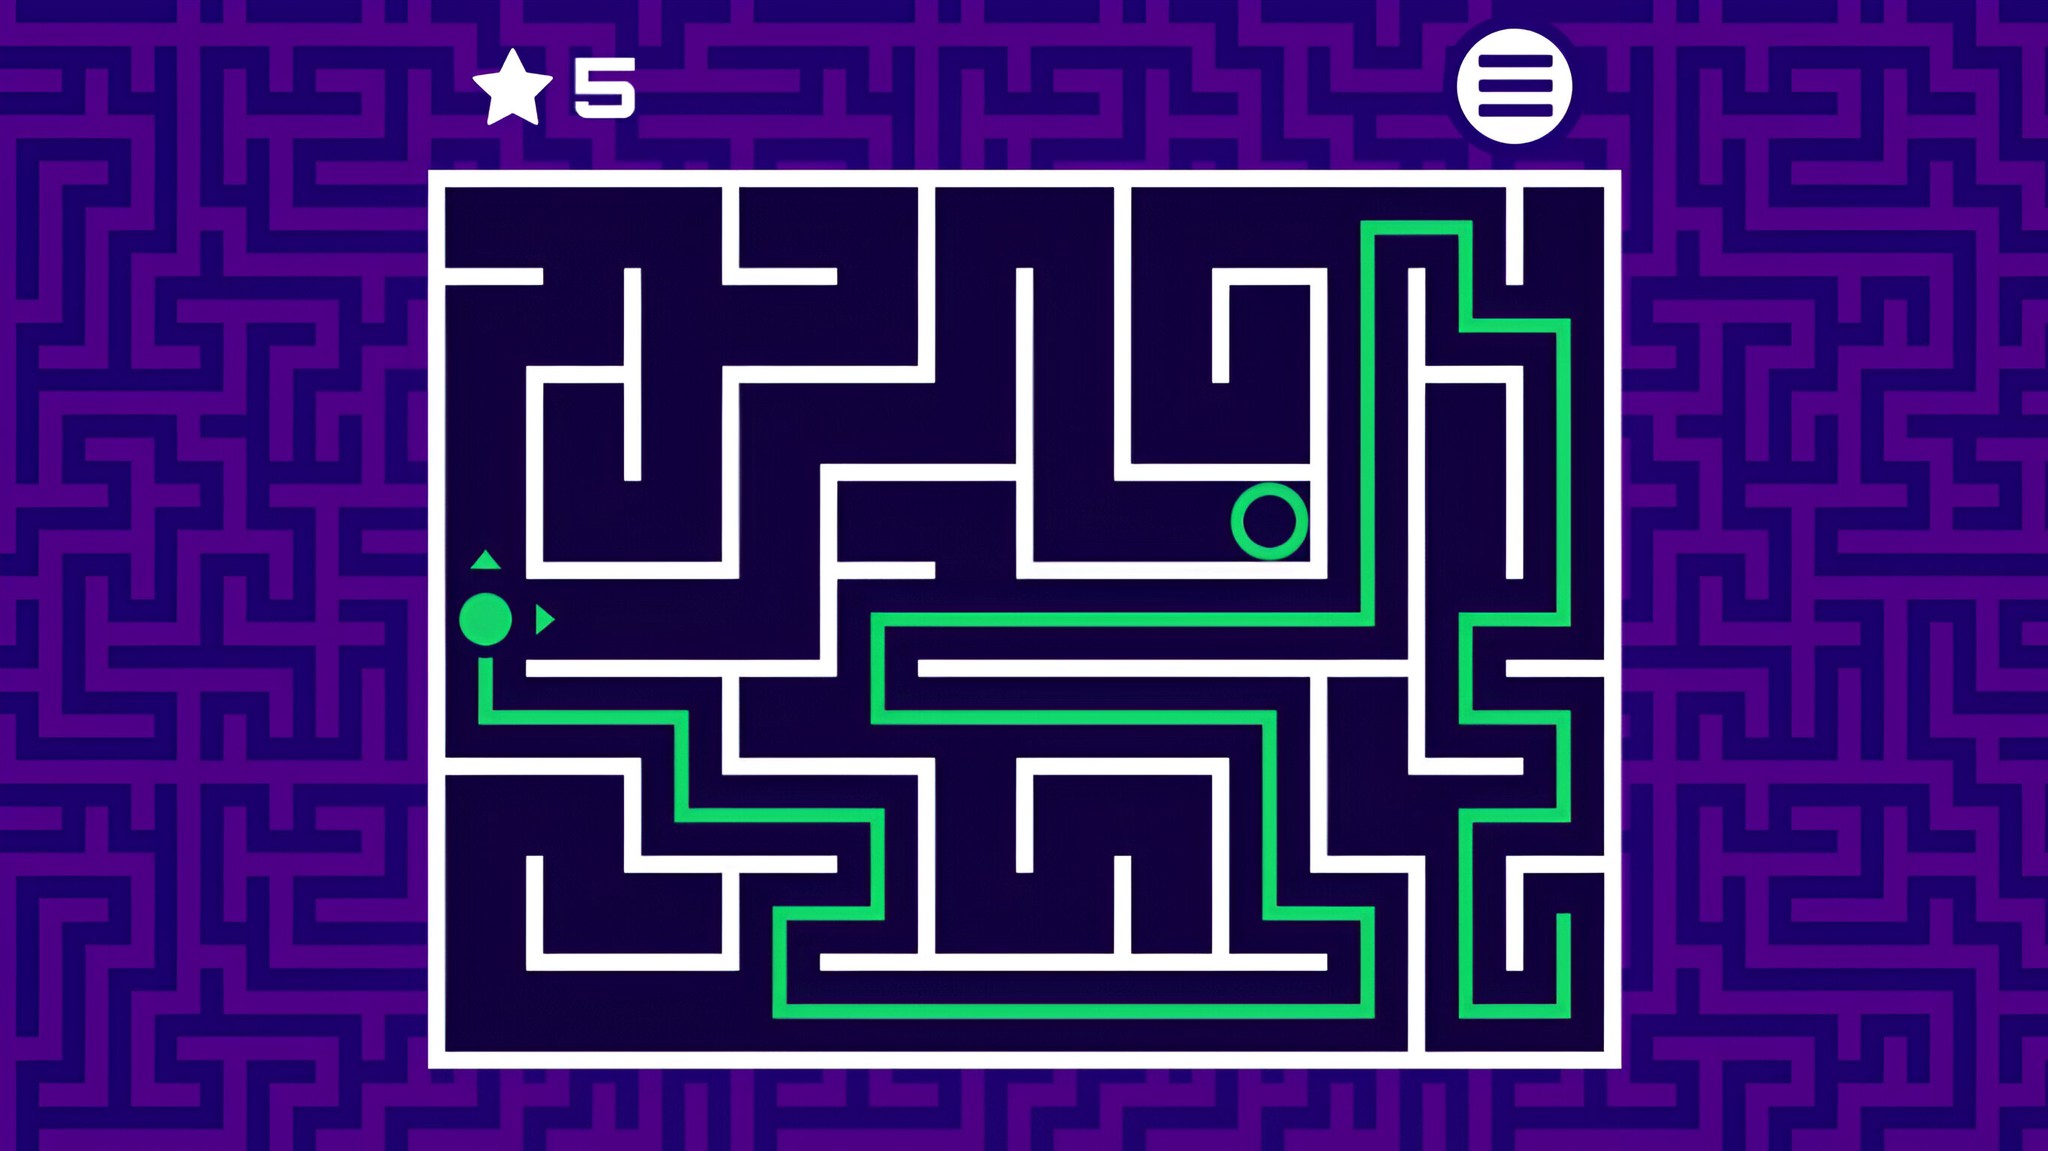 Image Maze - Play Free Online Puzzle Game